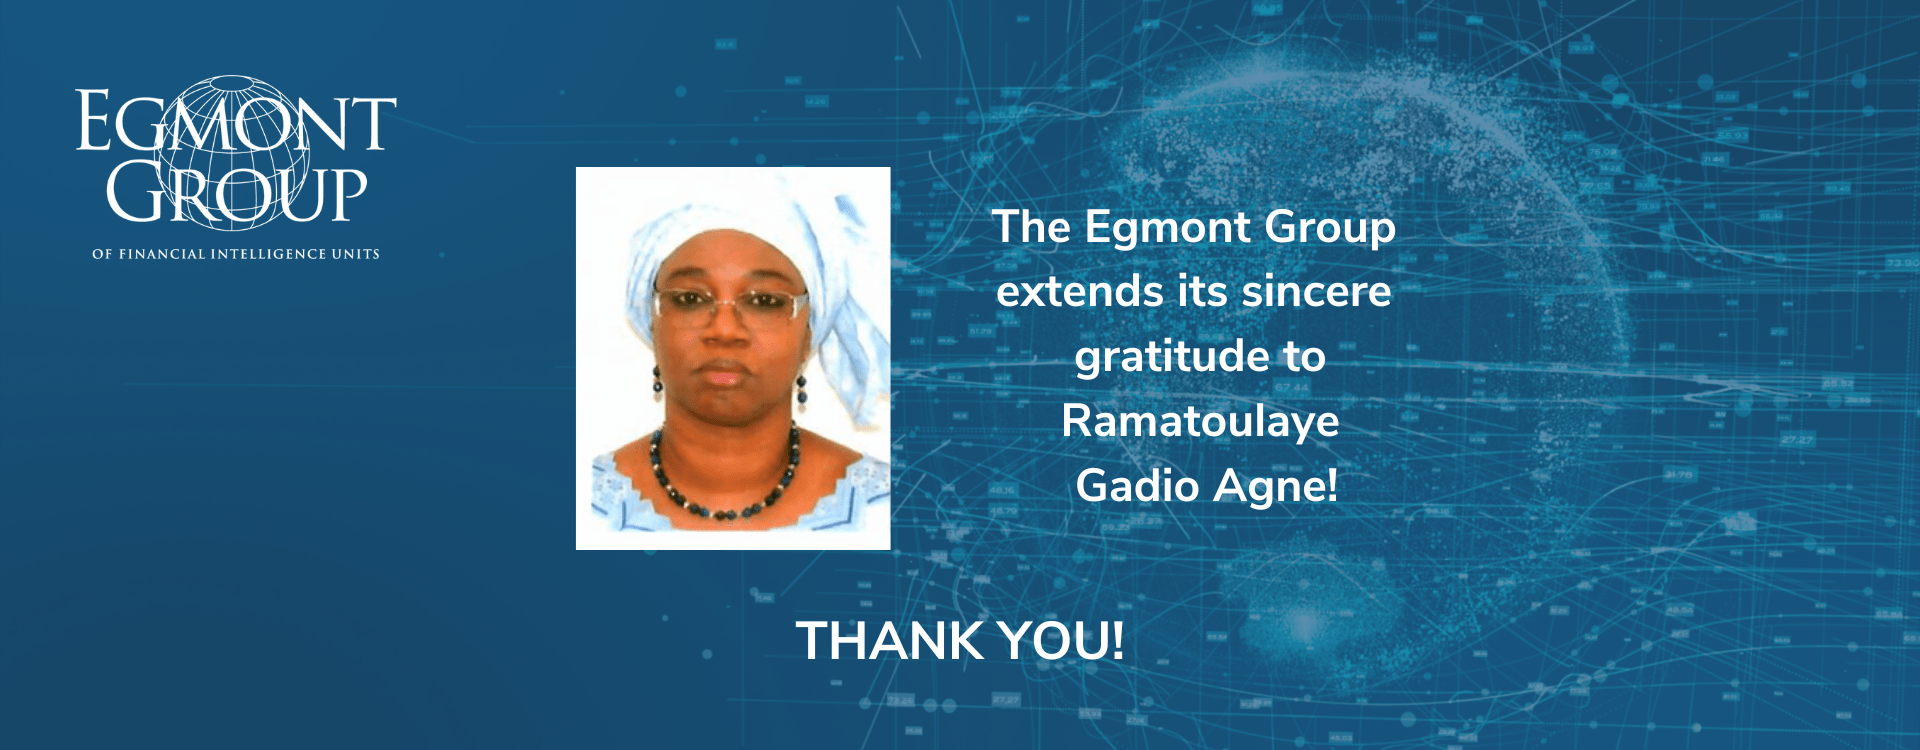 The Egmont Group Recognizes Ramatoulaye Gadio Agne’s Exceptional Contributions as an International Anti-Money Laundering and Counter-Terrorist Financing Role Model